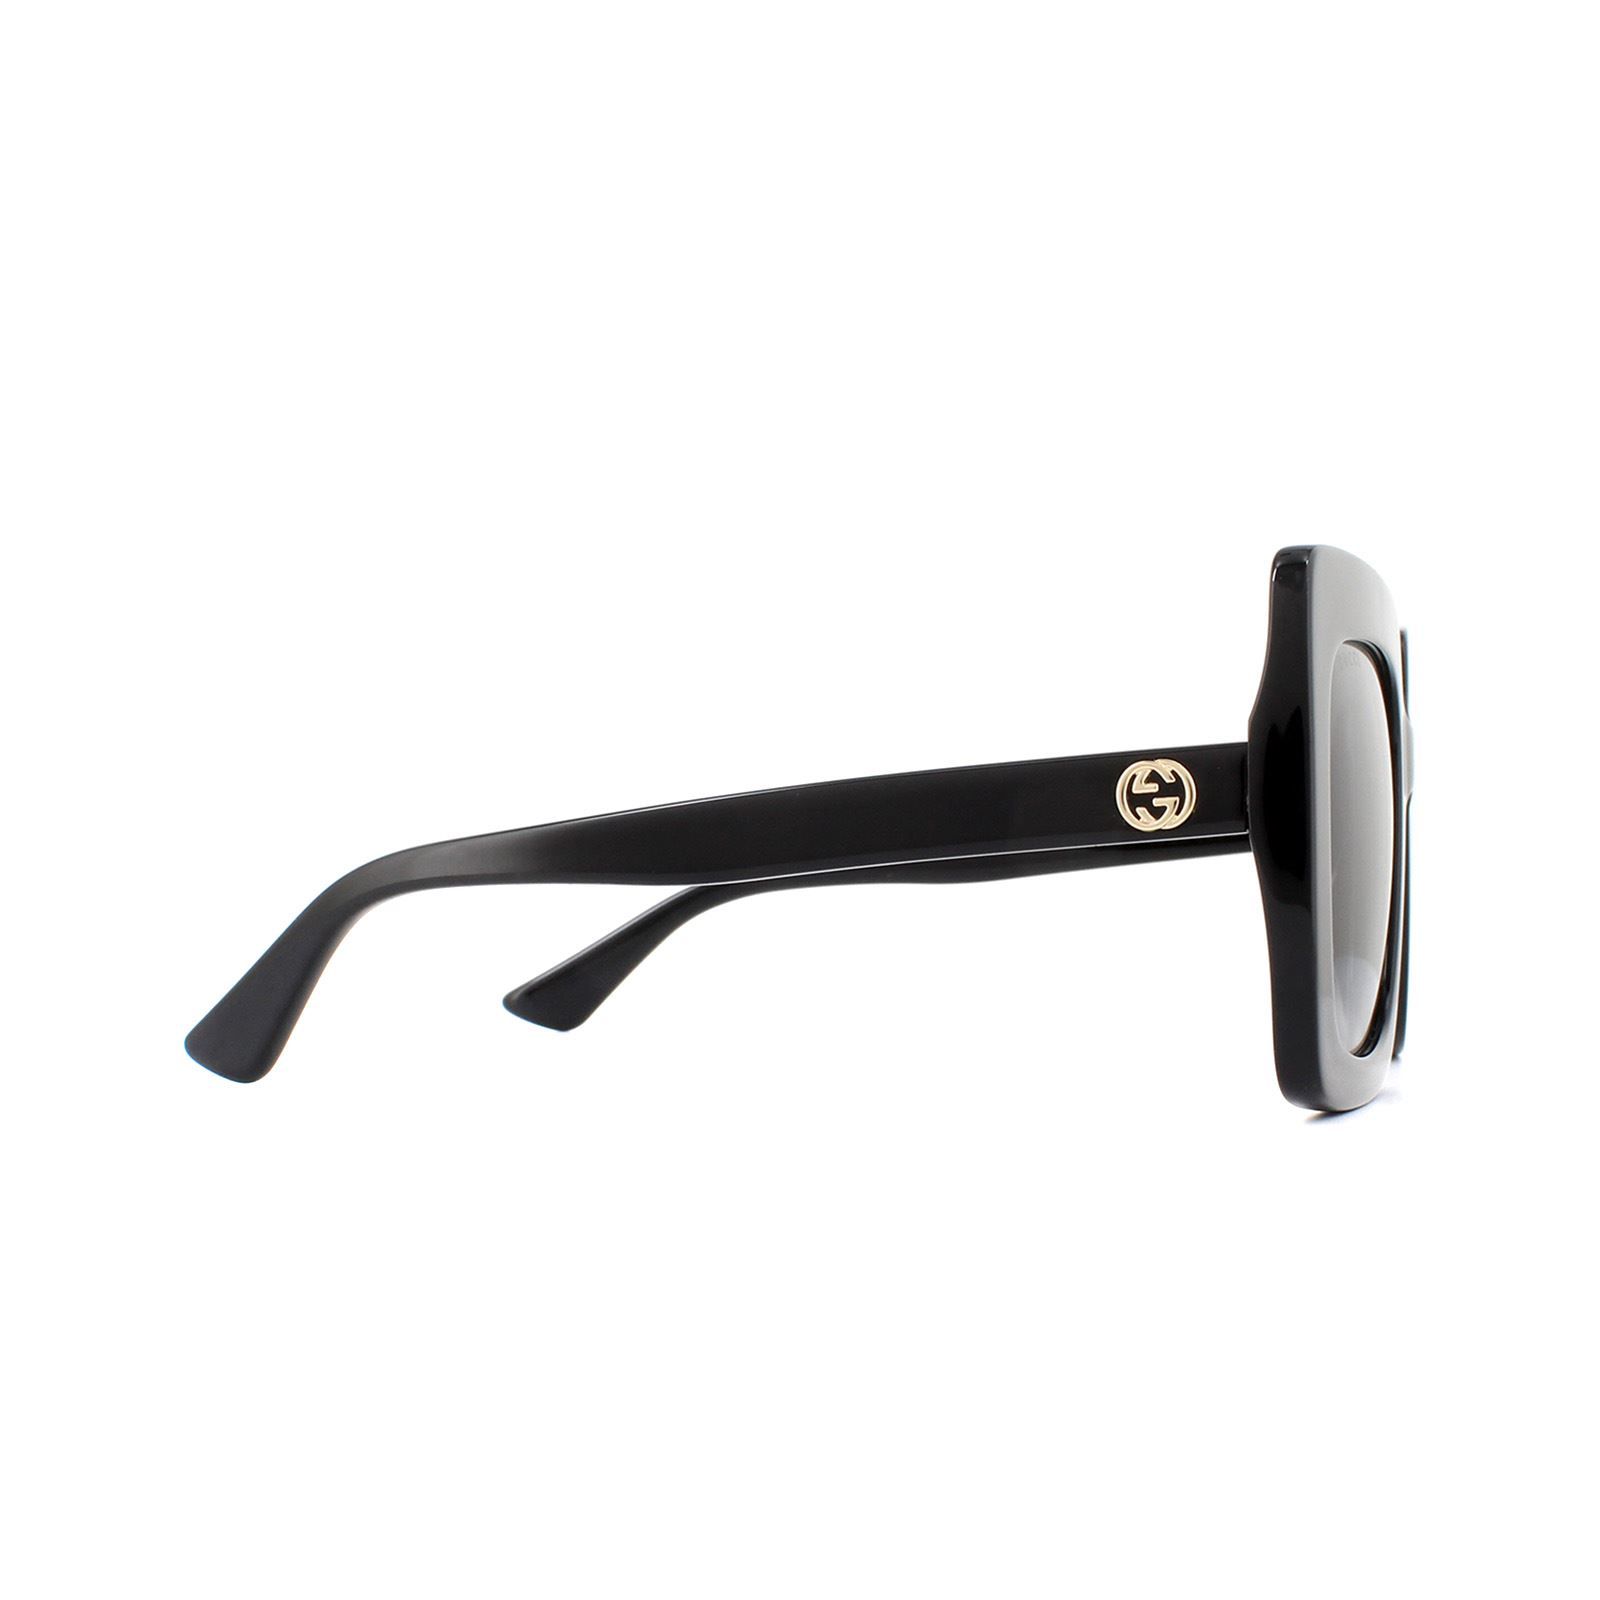 Gucci Sunglasses GG0328S 001 Black Grey Gradient are an oversized square design crafted from lightweight acetate. Slim temples feature the iconic interlocking GG logo in metal.